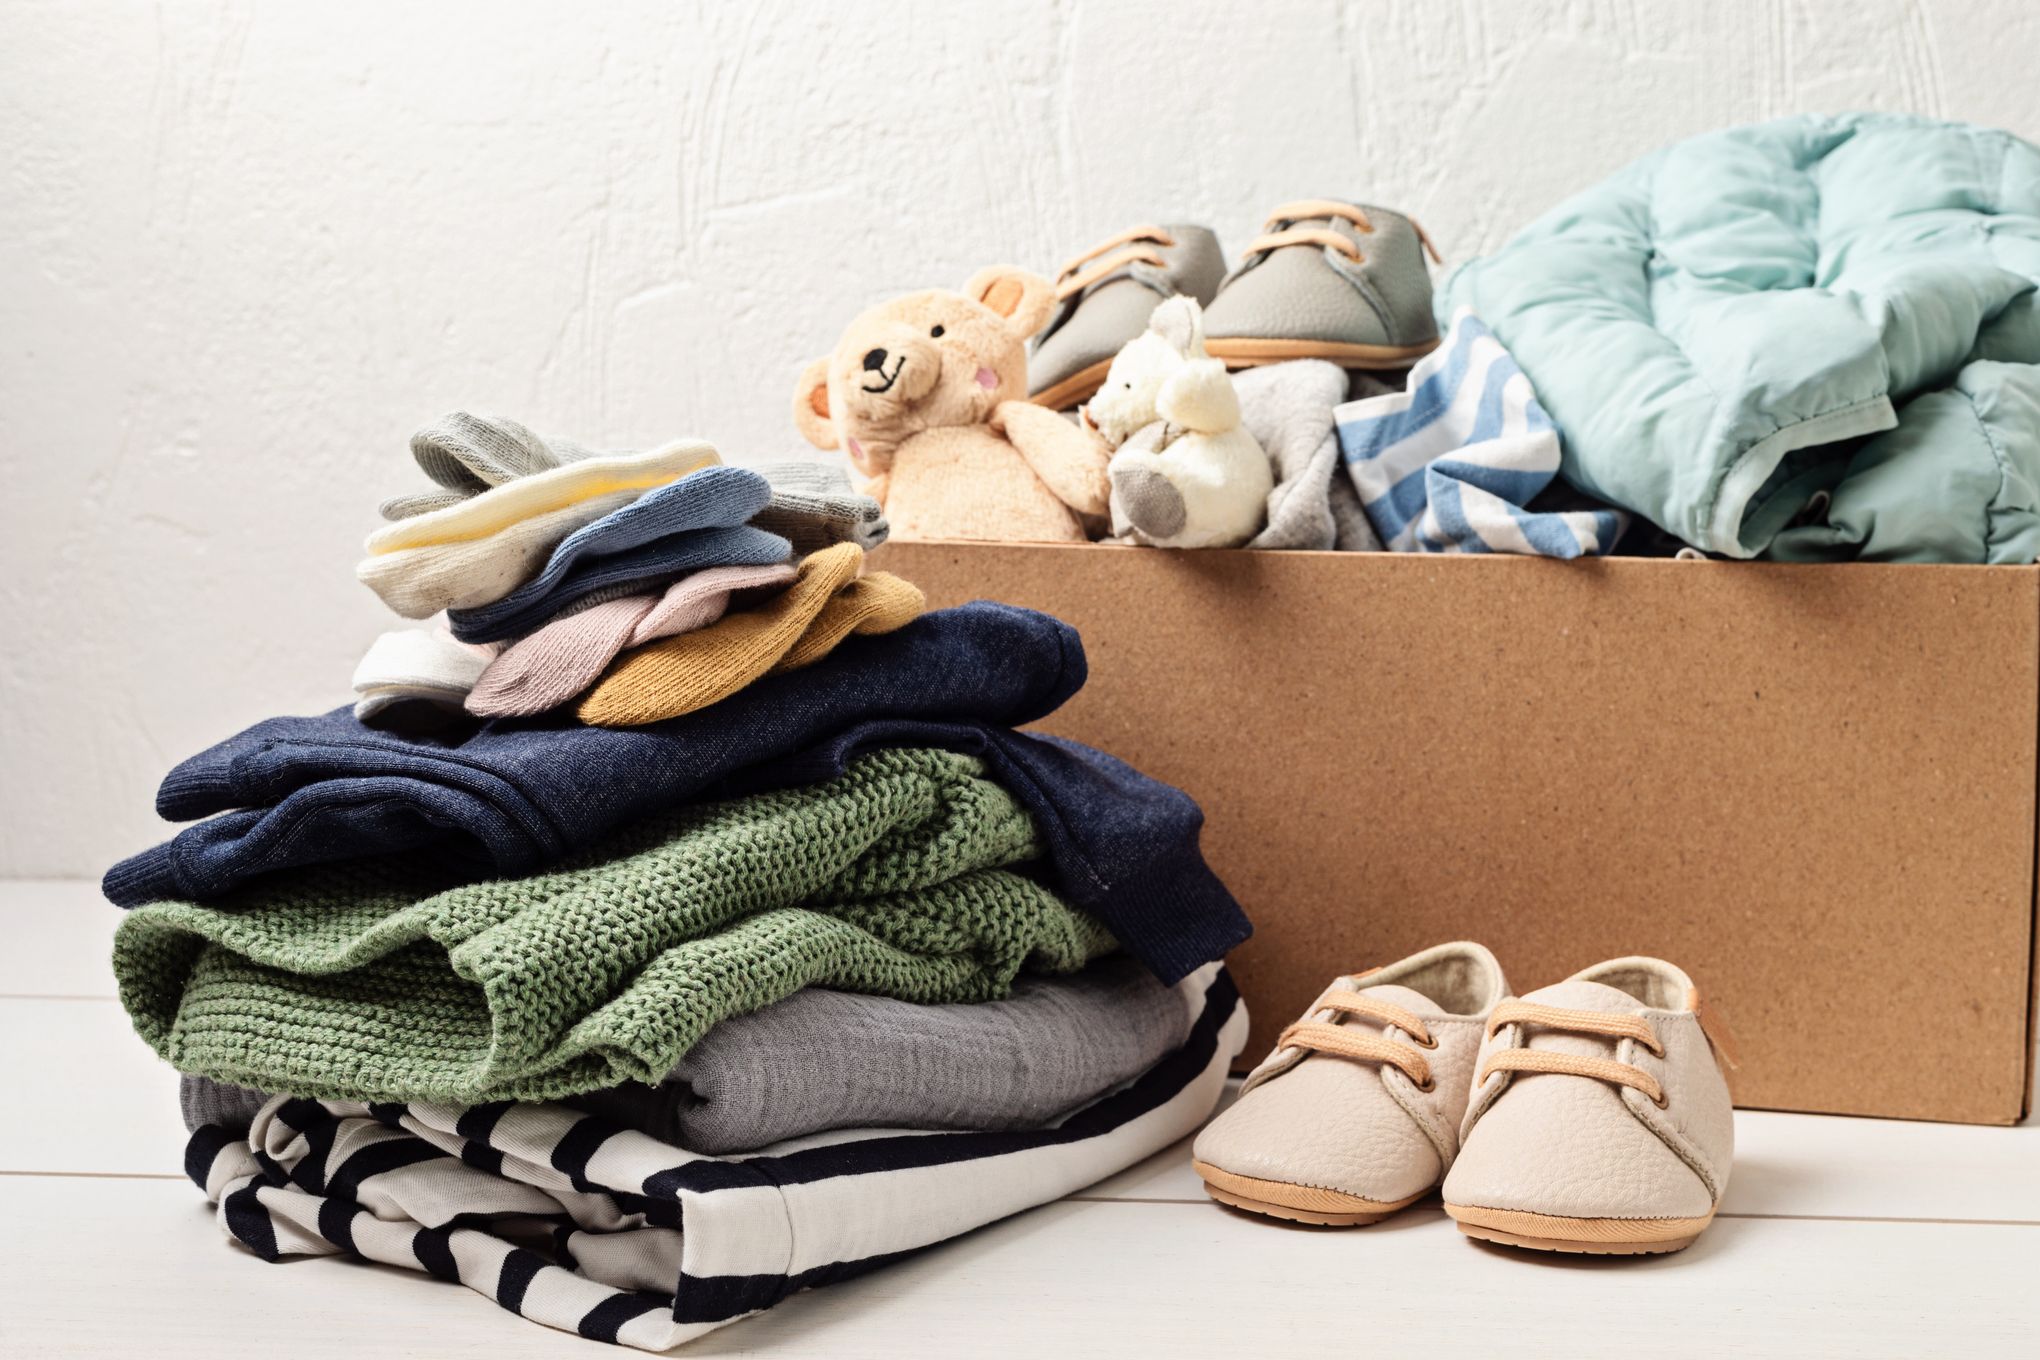 Guidelines for culling your closet, and where to donate in Seattle